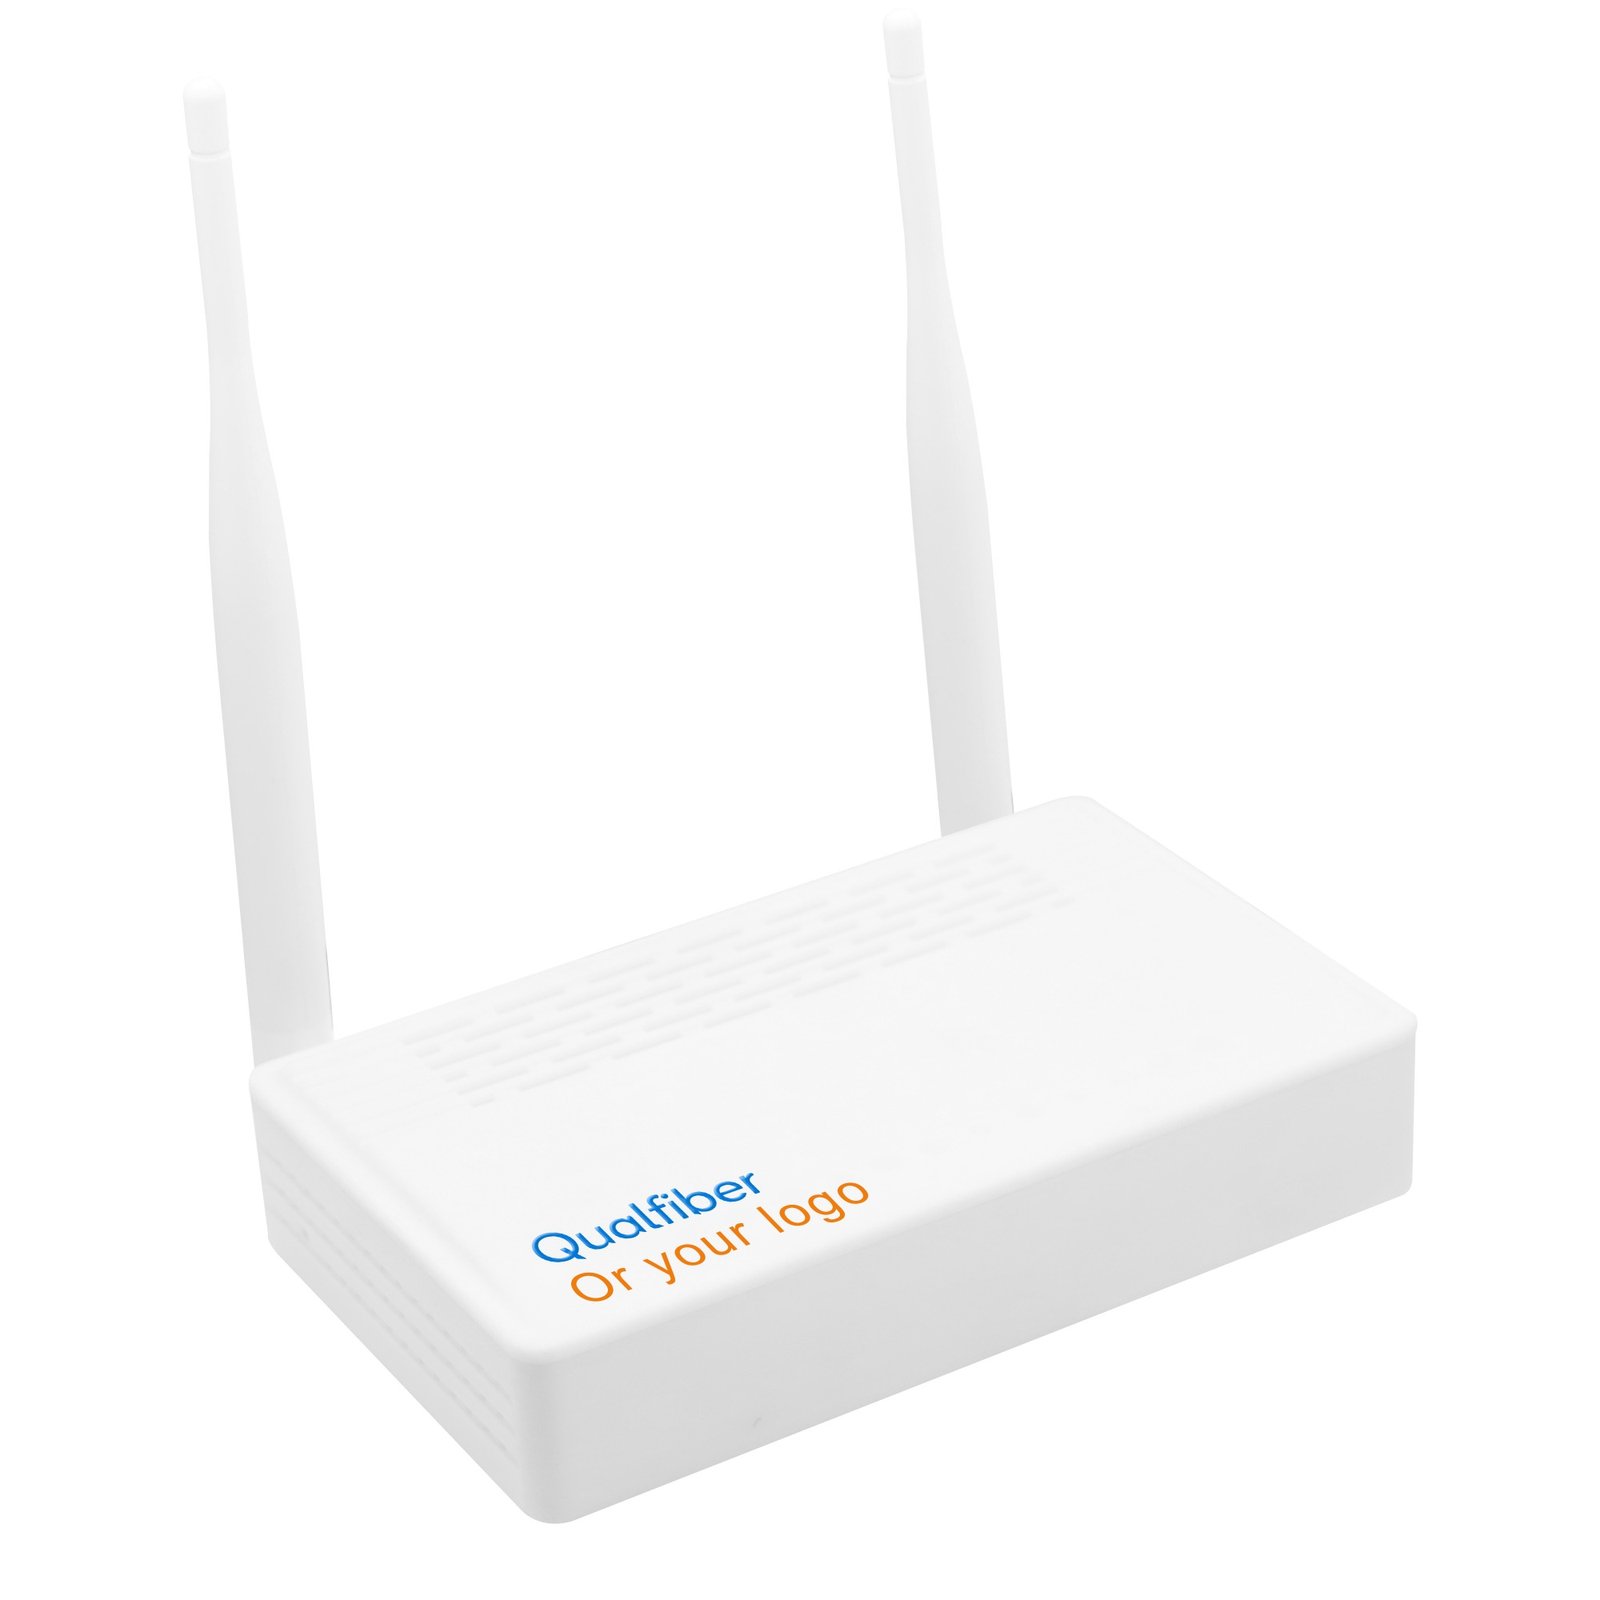 OEM Customized Syrotech Gepon-Onu - QF-HX103WP 1GE+3FE WIFI+POTS XPON ONU(Both GPON ONT and EPON ONT) – Qualfiber